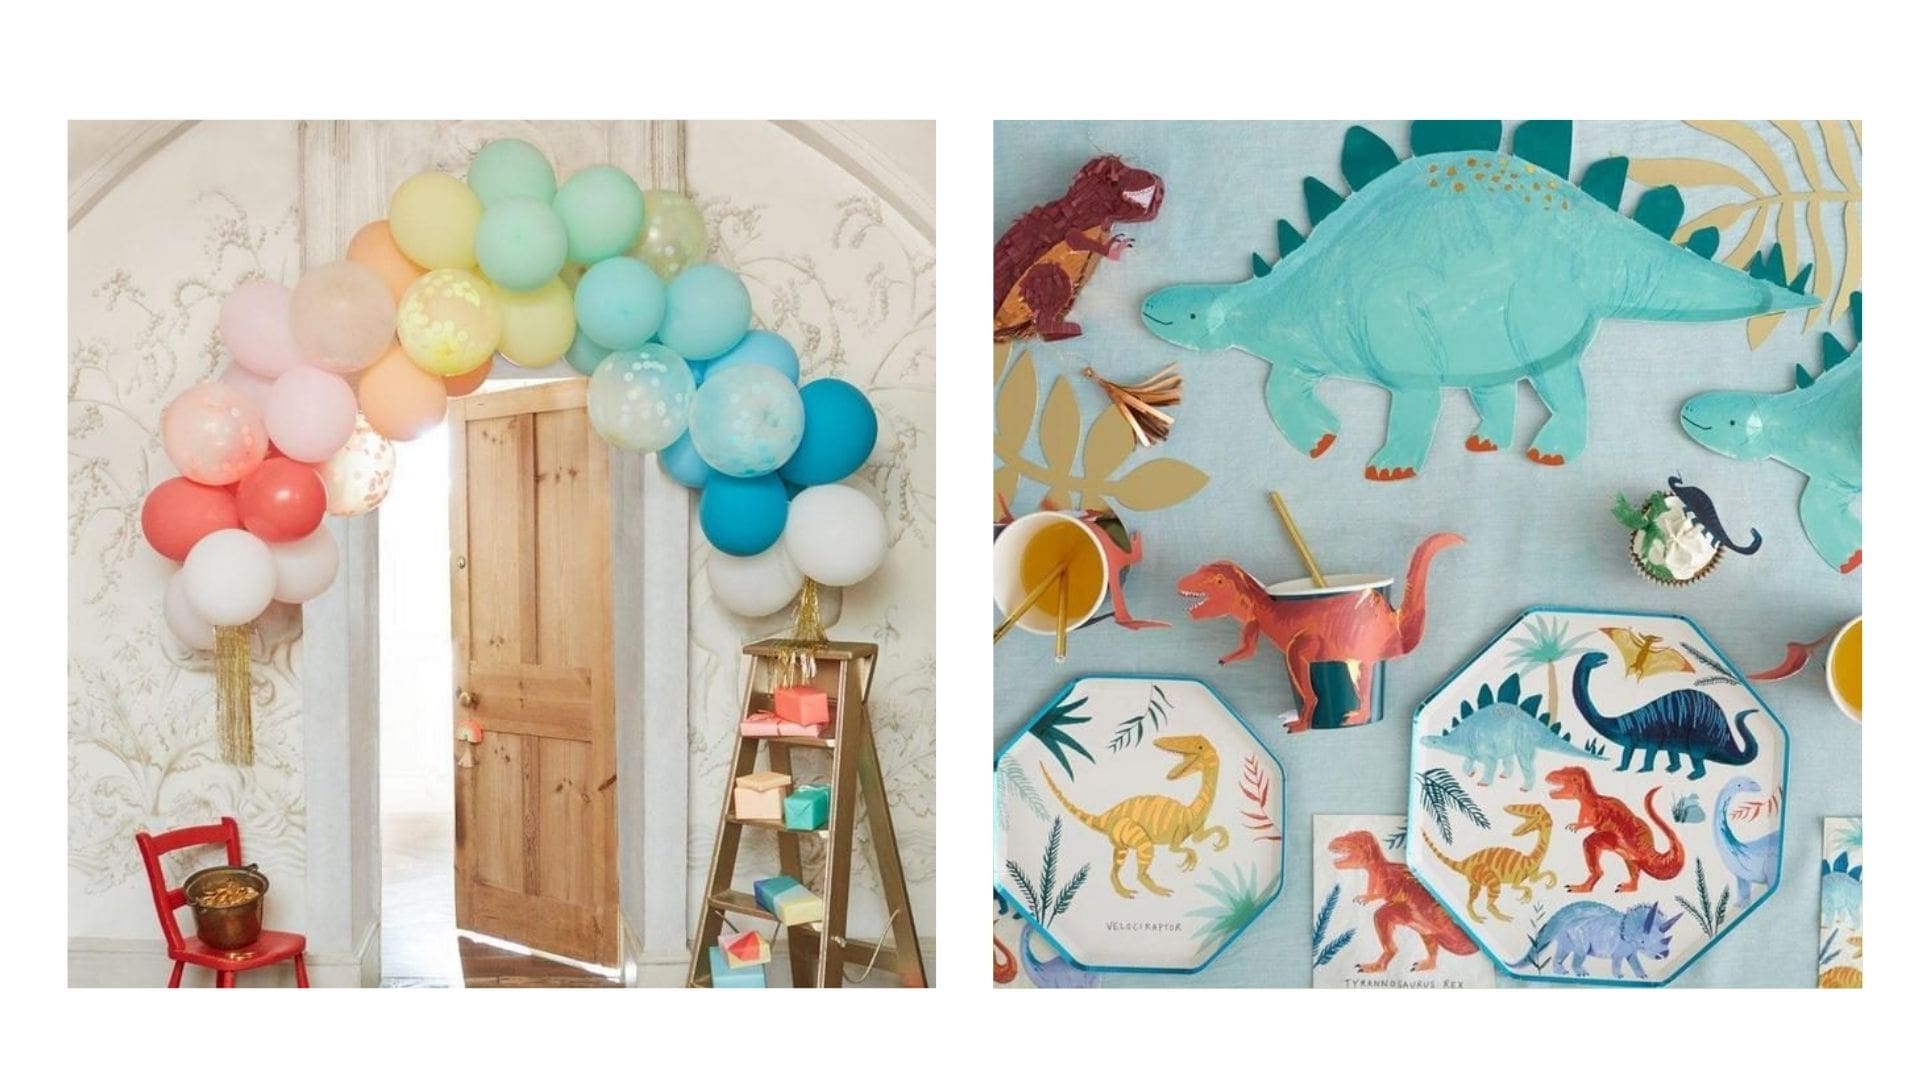 A split image, one showing a balloon arch over a door, and the other showing dinosaur themed party plates, cusp, napkins and table decorations.